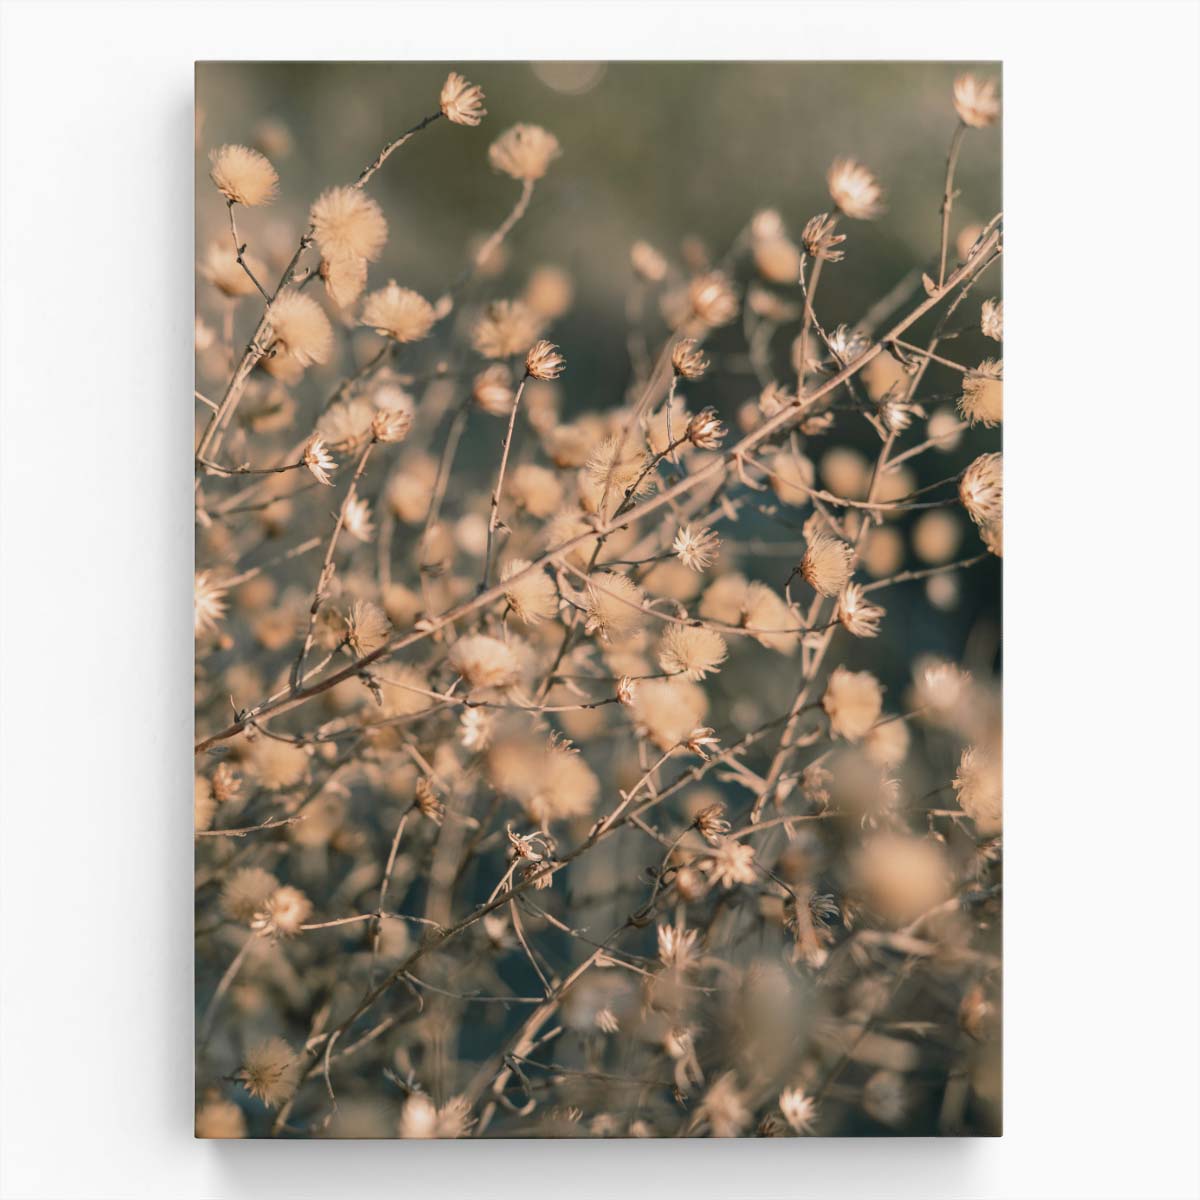 Beige Macro Floral Botanical Photography, Close-Up Bokeh Art by Luxuriance Designs, made in USA